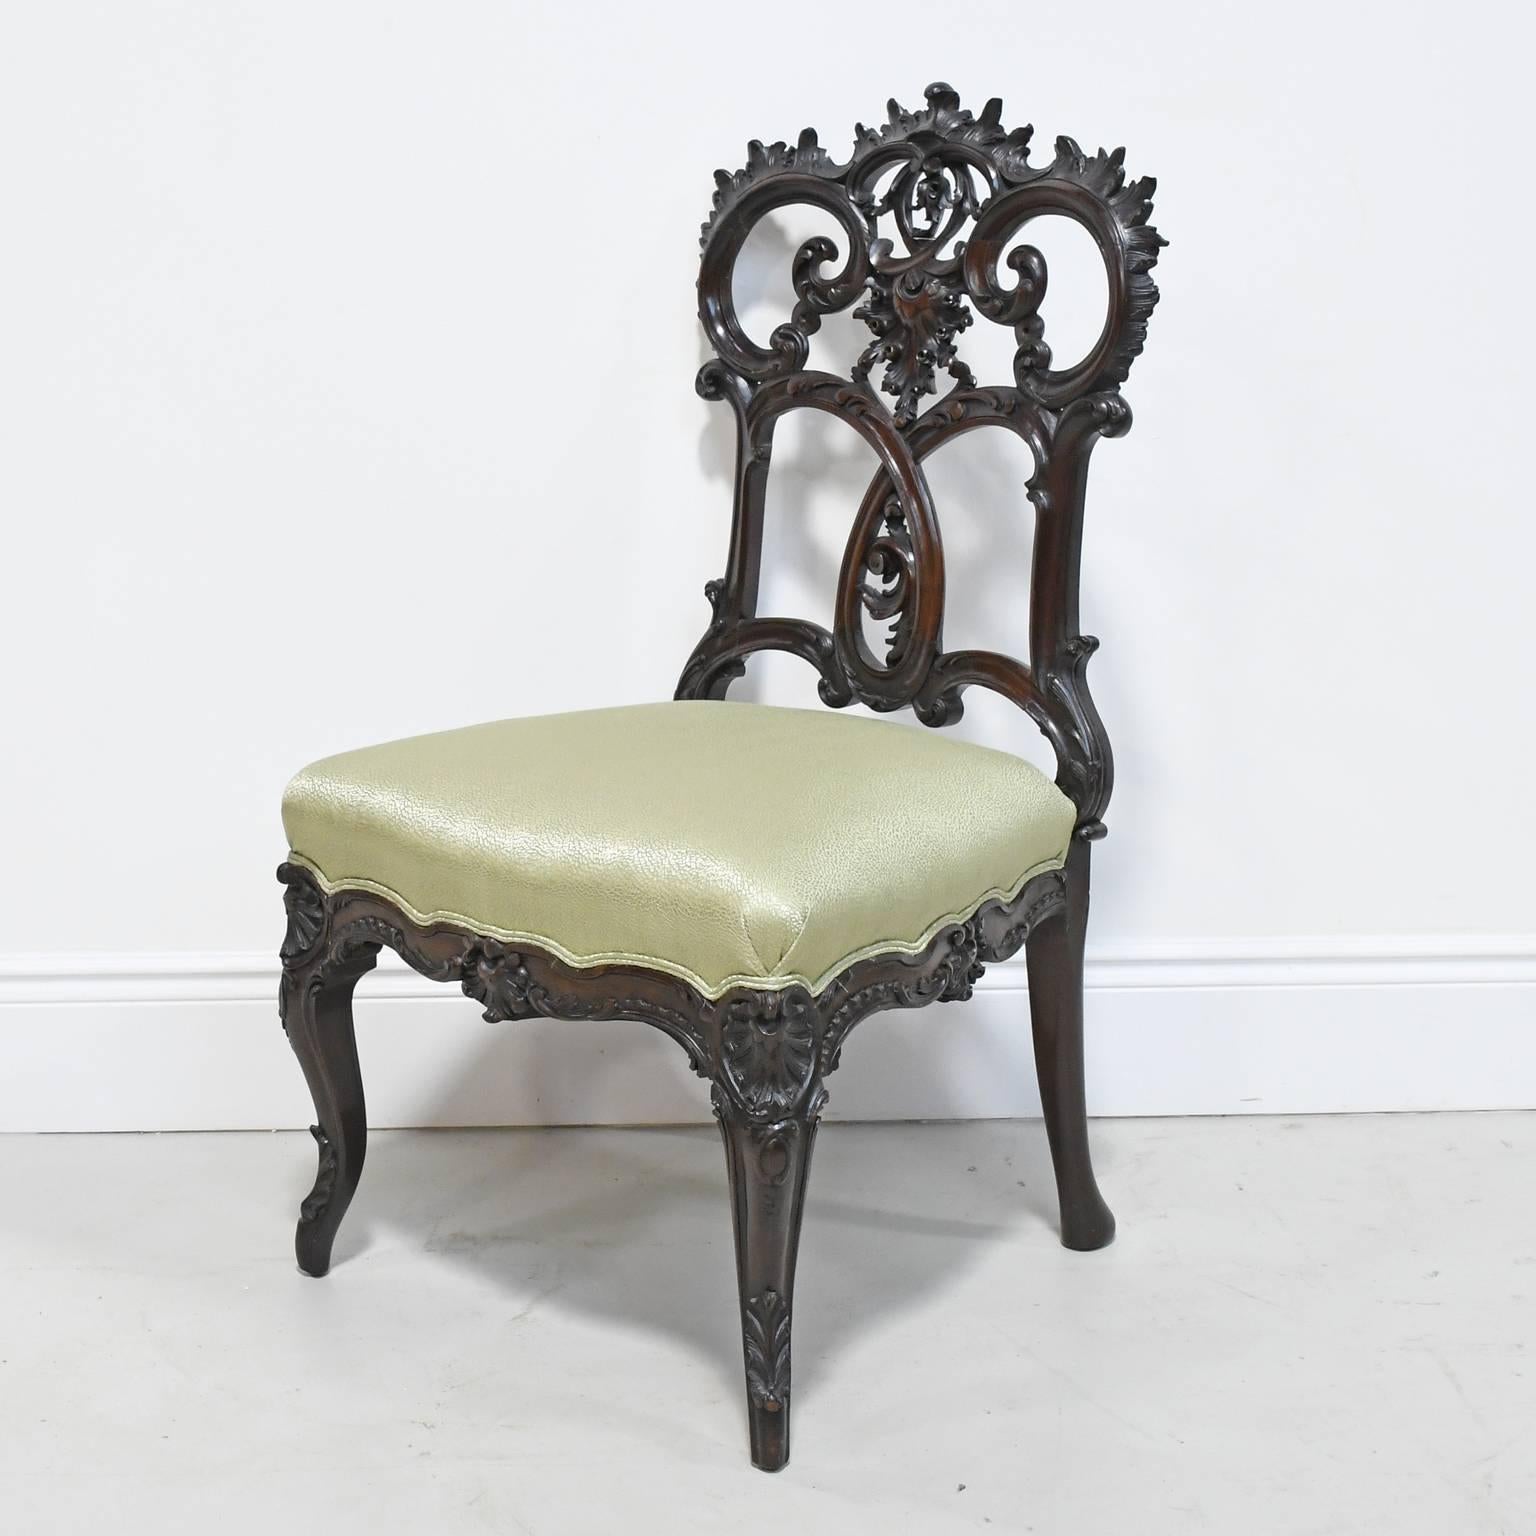 Pair of Antique American Carved Rococo Revival Chairs in Mahogany w/ Upholstery For Sale 1